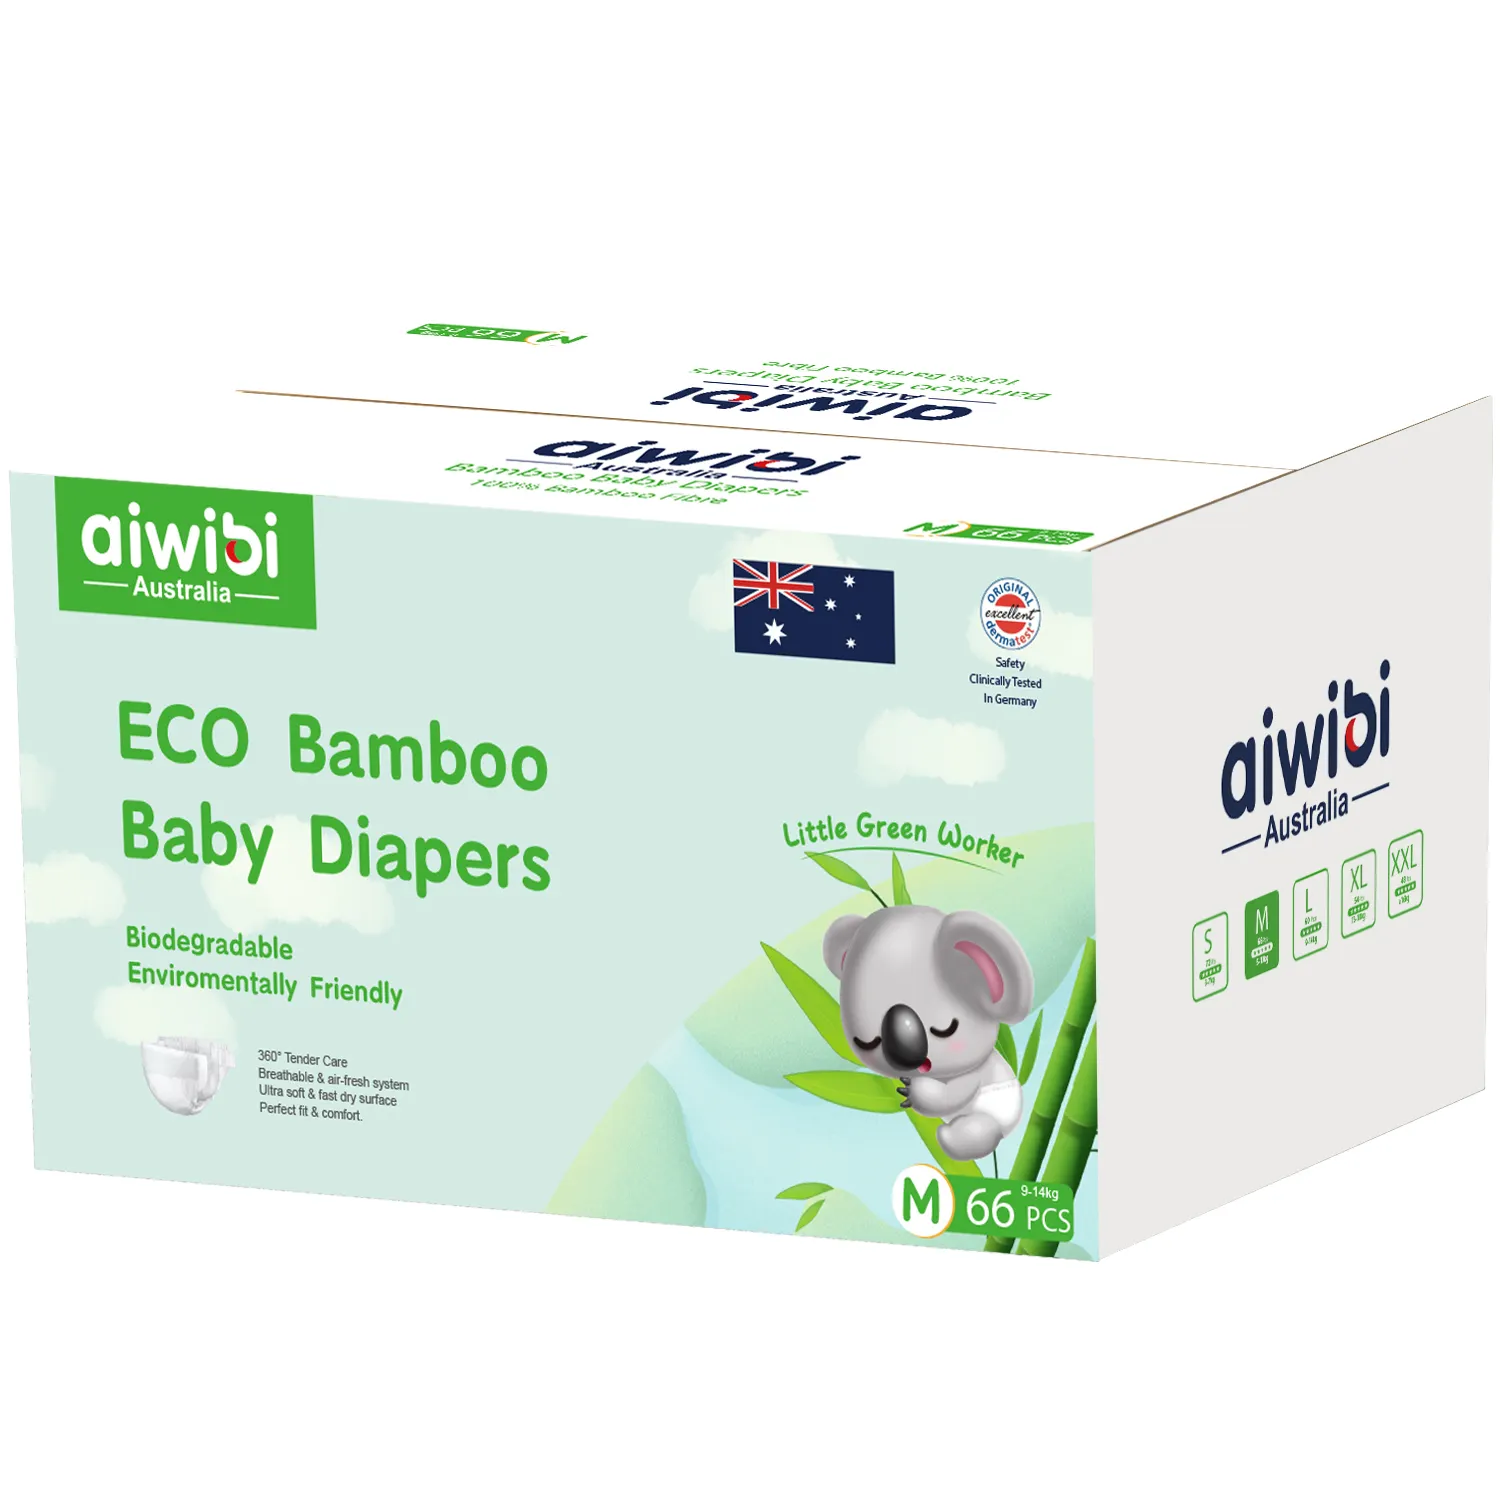 Aiwibi Biodegradable Bamboo Fabric Breathable Nappies Diapers NO MOQ Disposable Baby Diapers with Wetness Indicator